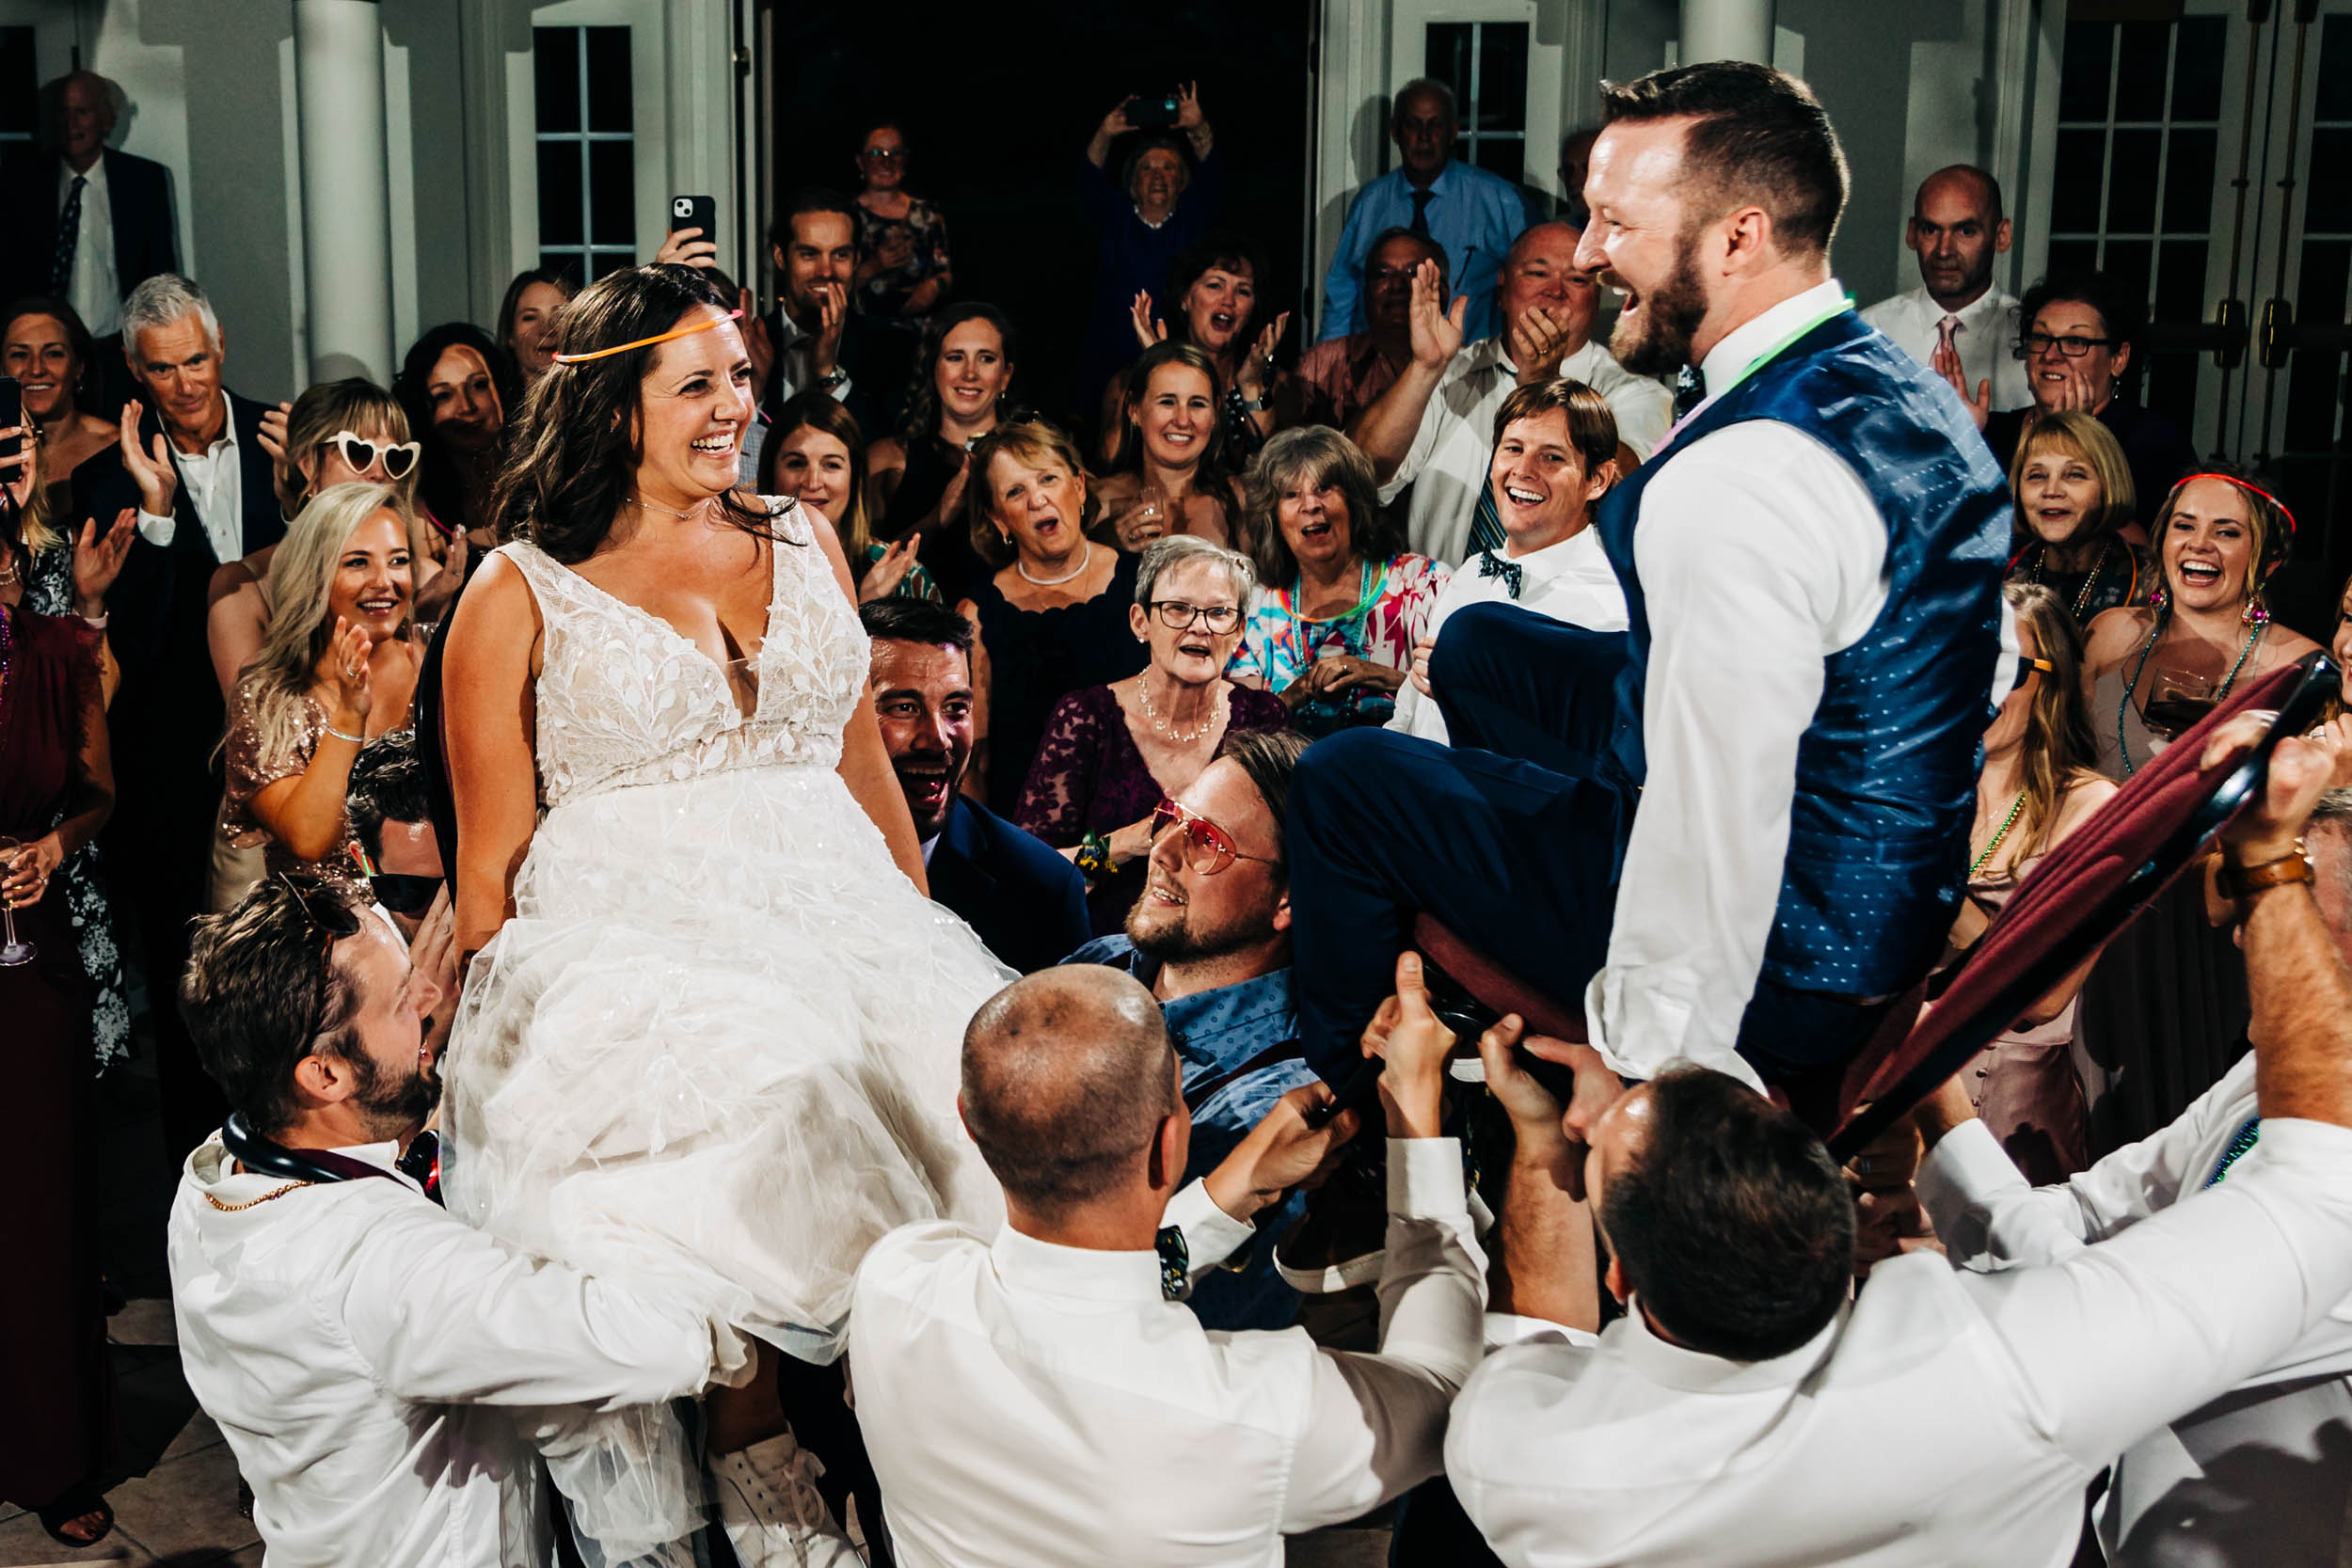 Jewish wedding at Lionscrest Manor in Colorado by Shea McGrath Photography